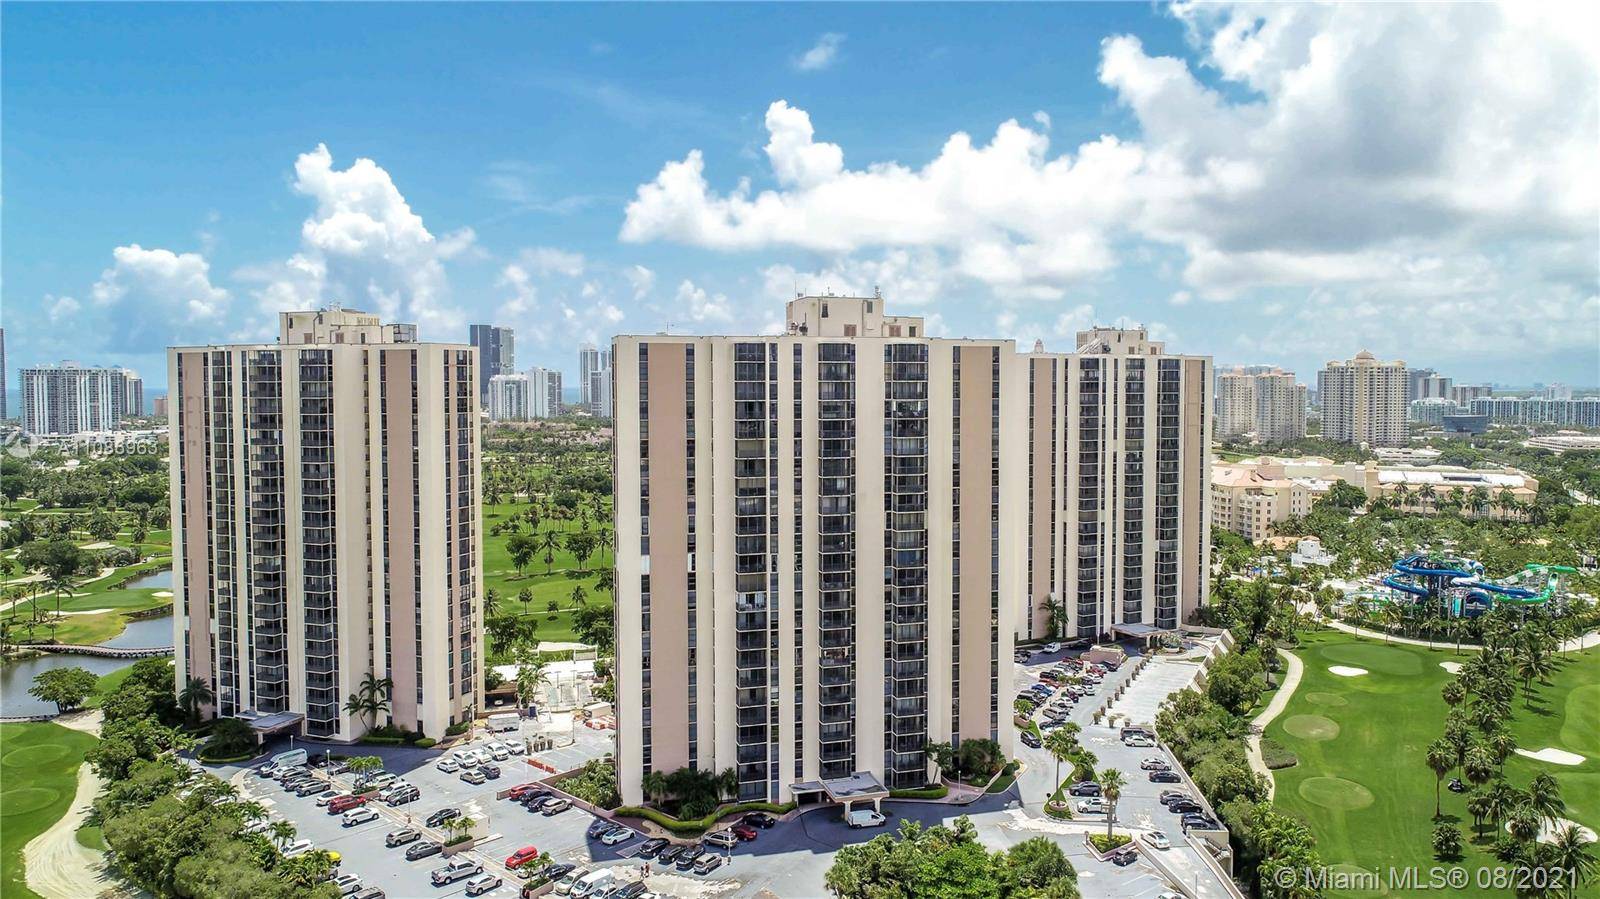 Corner unit on the Penthouse Level in Coronado Condo in Aventura located on Turnberry Isles Golf Course with amazing golf course, ocean and city views.